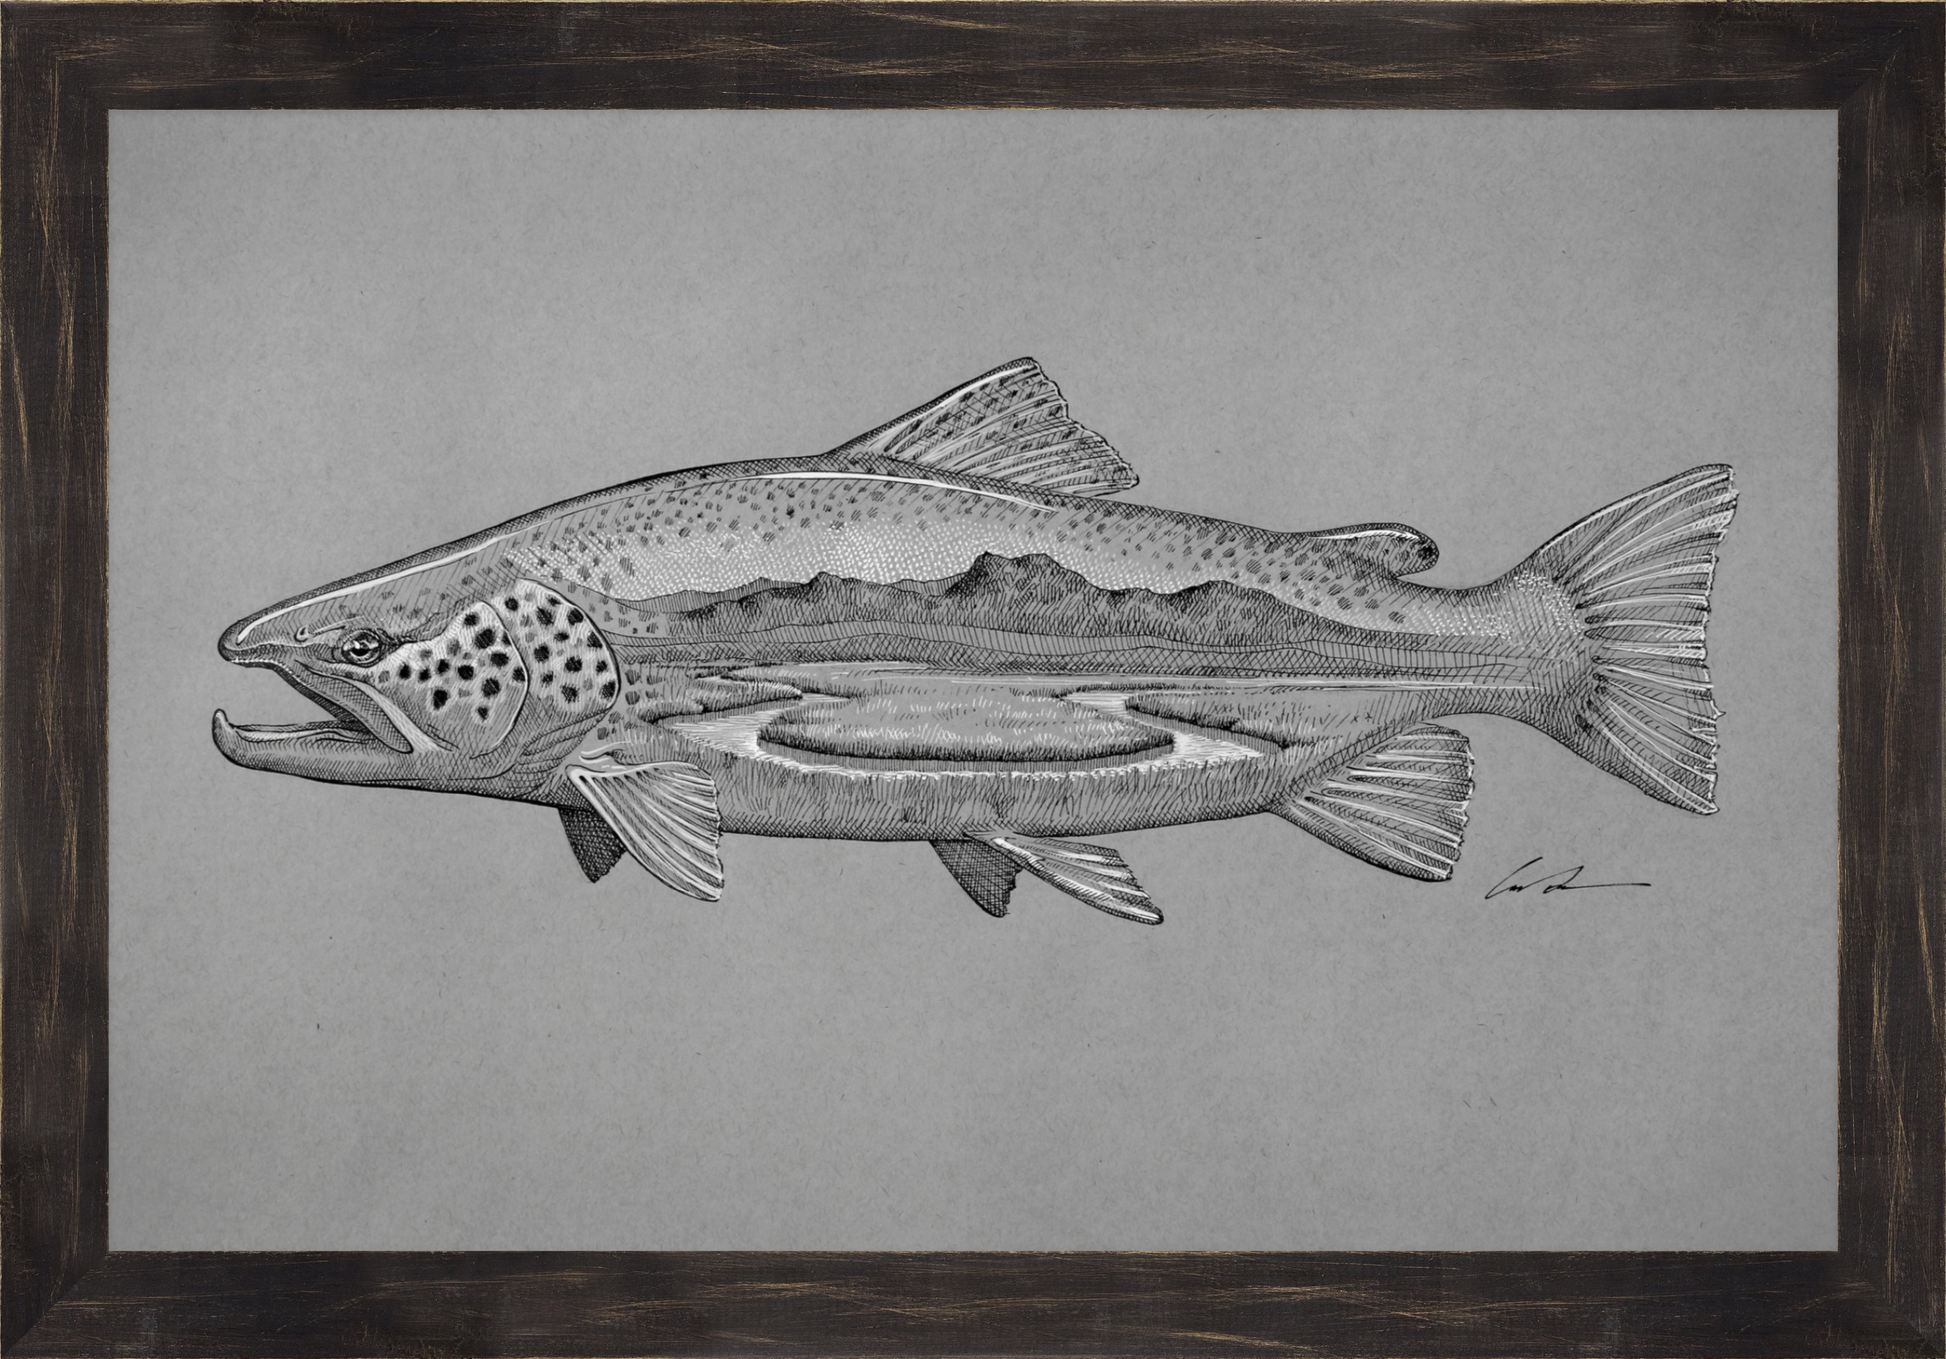 A pen and ink drawing of a brown trout with a spring creek inside of it on gray paper, framed in a black rustic frame